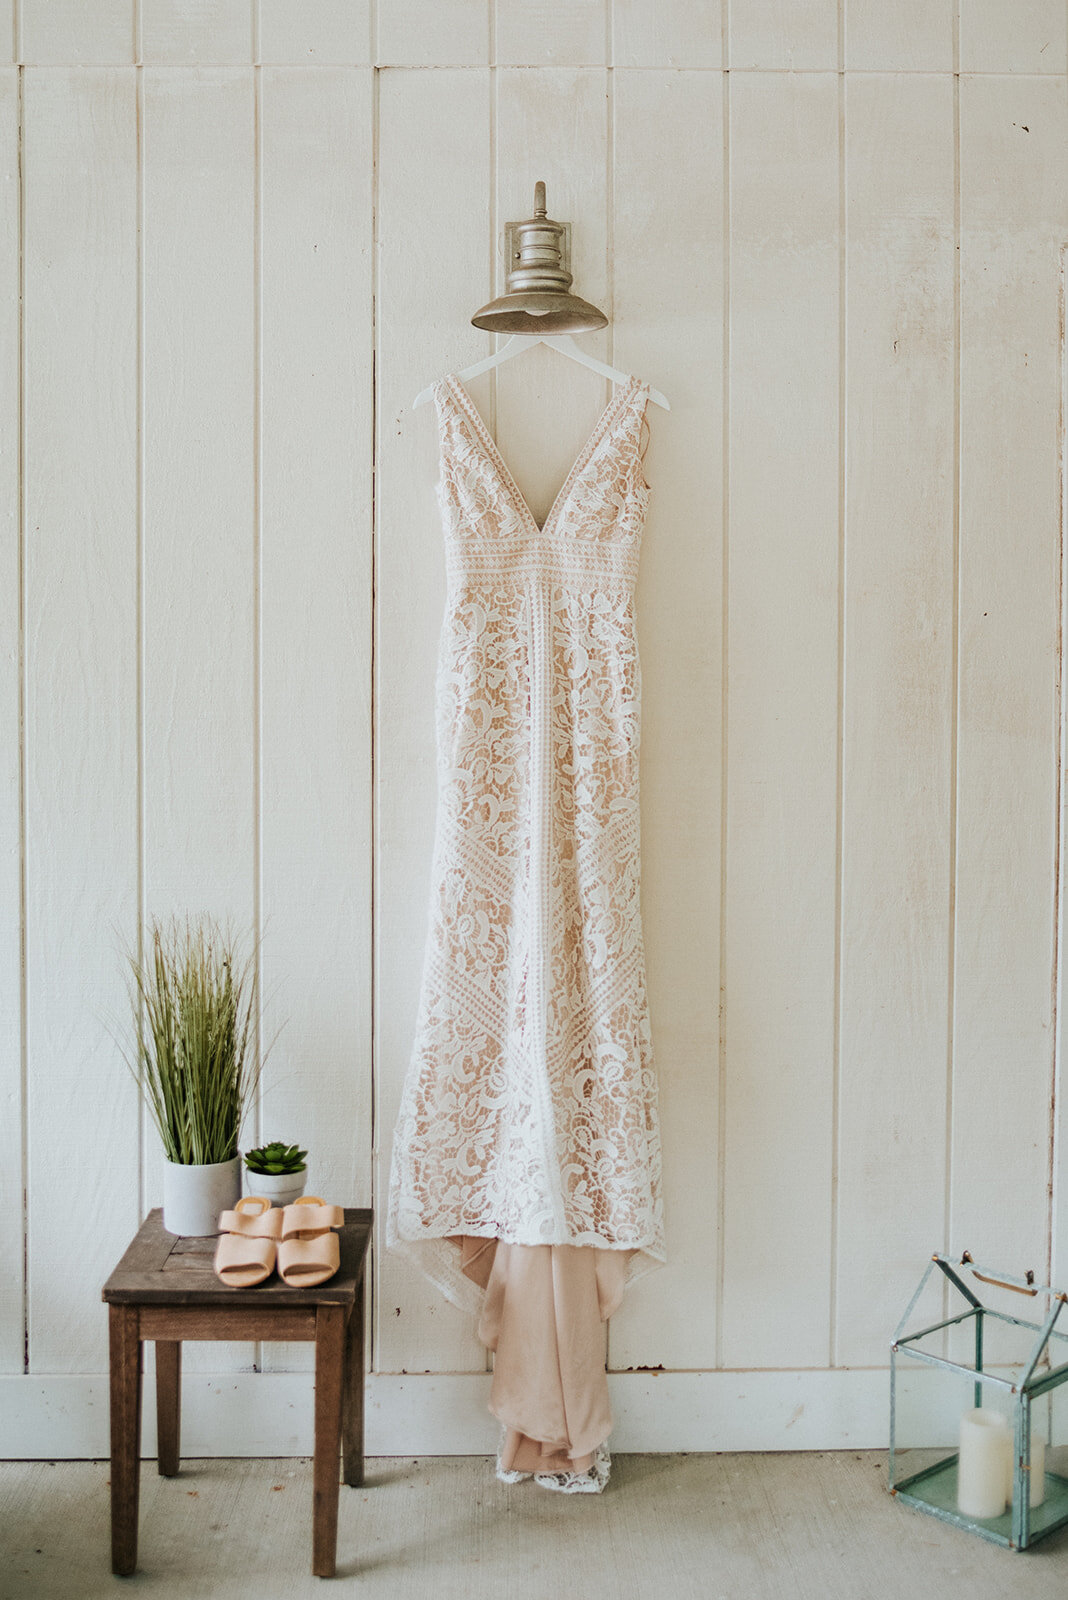 Bride knits her own wedding dress for $300 - Upworthy